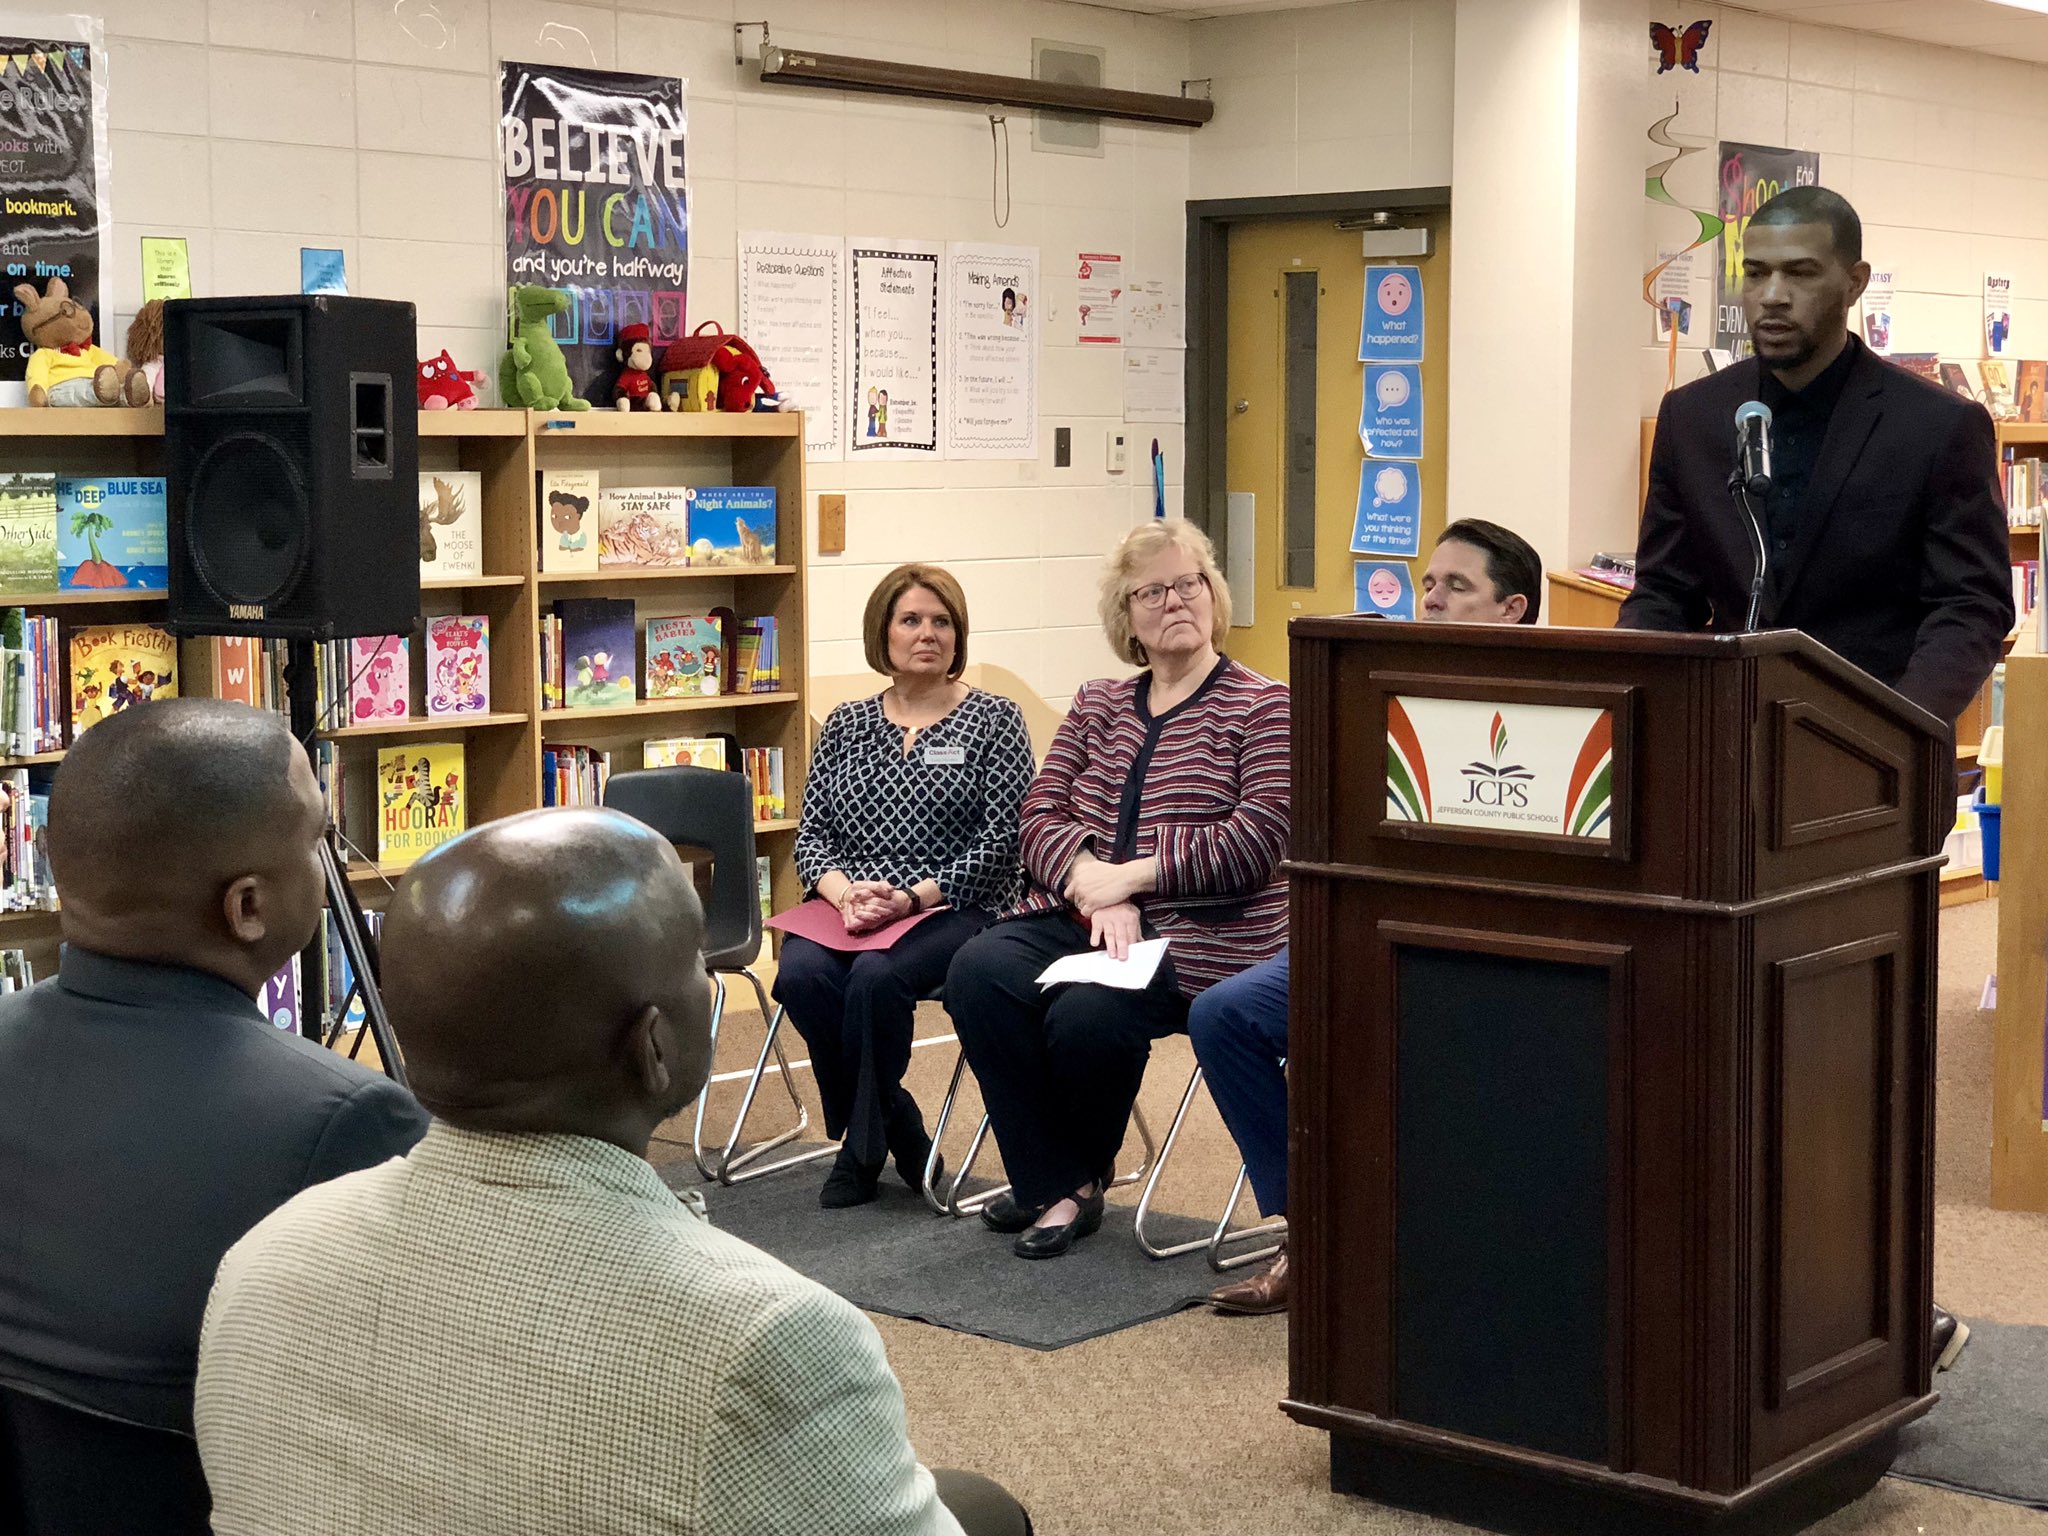 The objective of the Louisville Teacher Residency program, the first of its kind in Kentucky, is to increase the pool of diverse, highly-skilled teachers, particularly in low-performing, urban schools. 